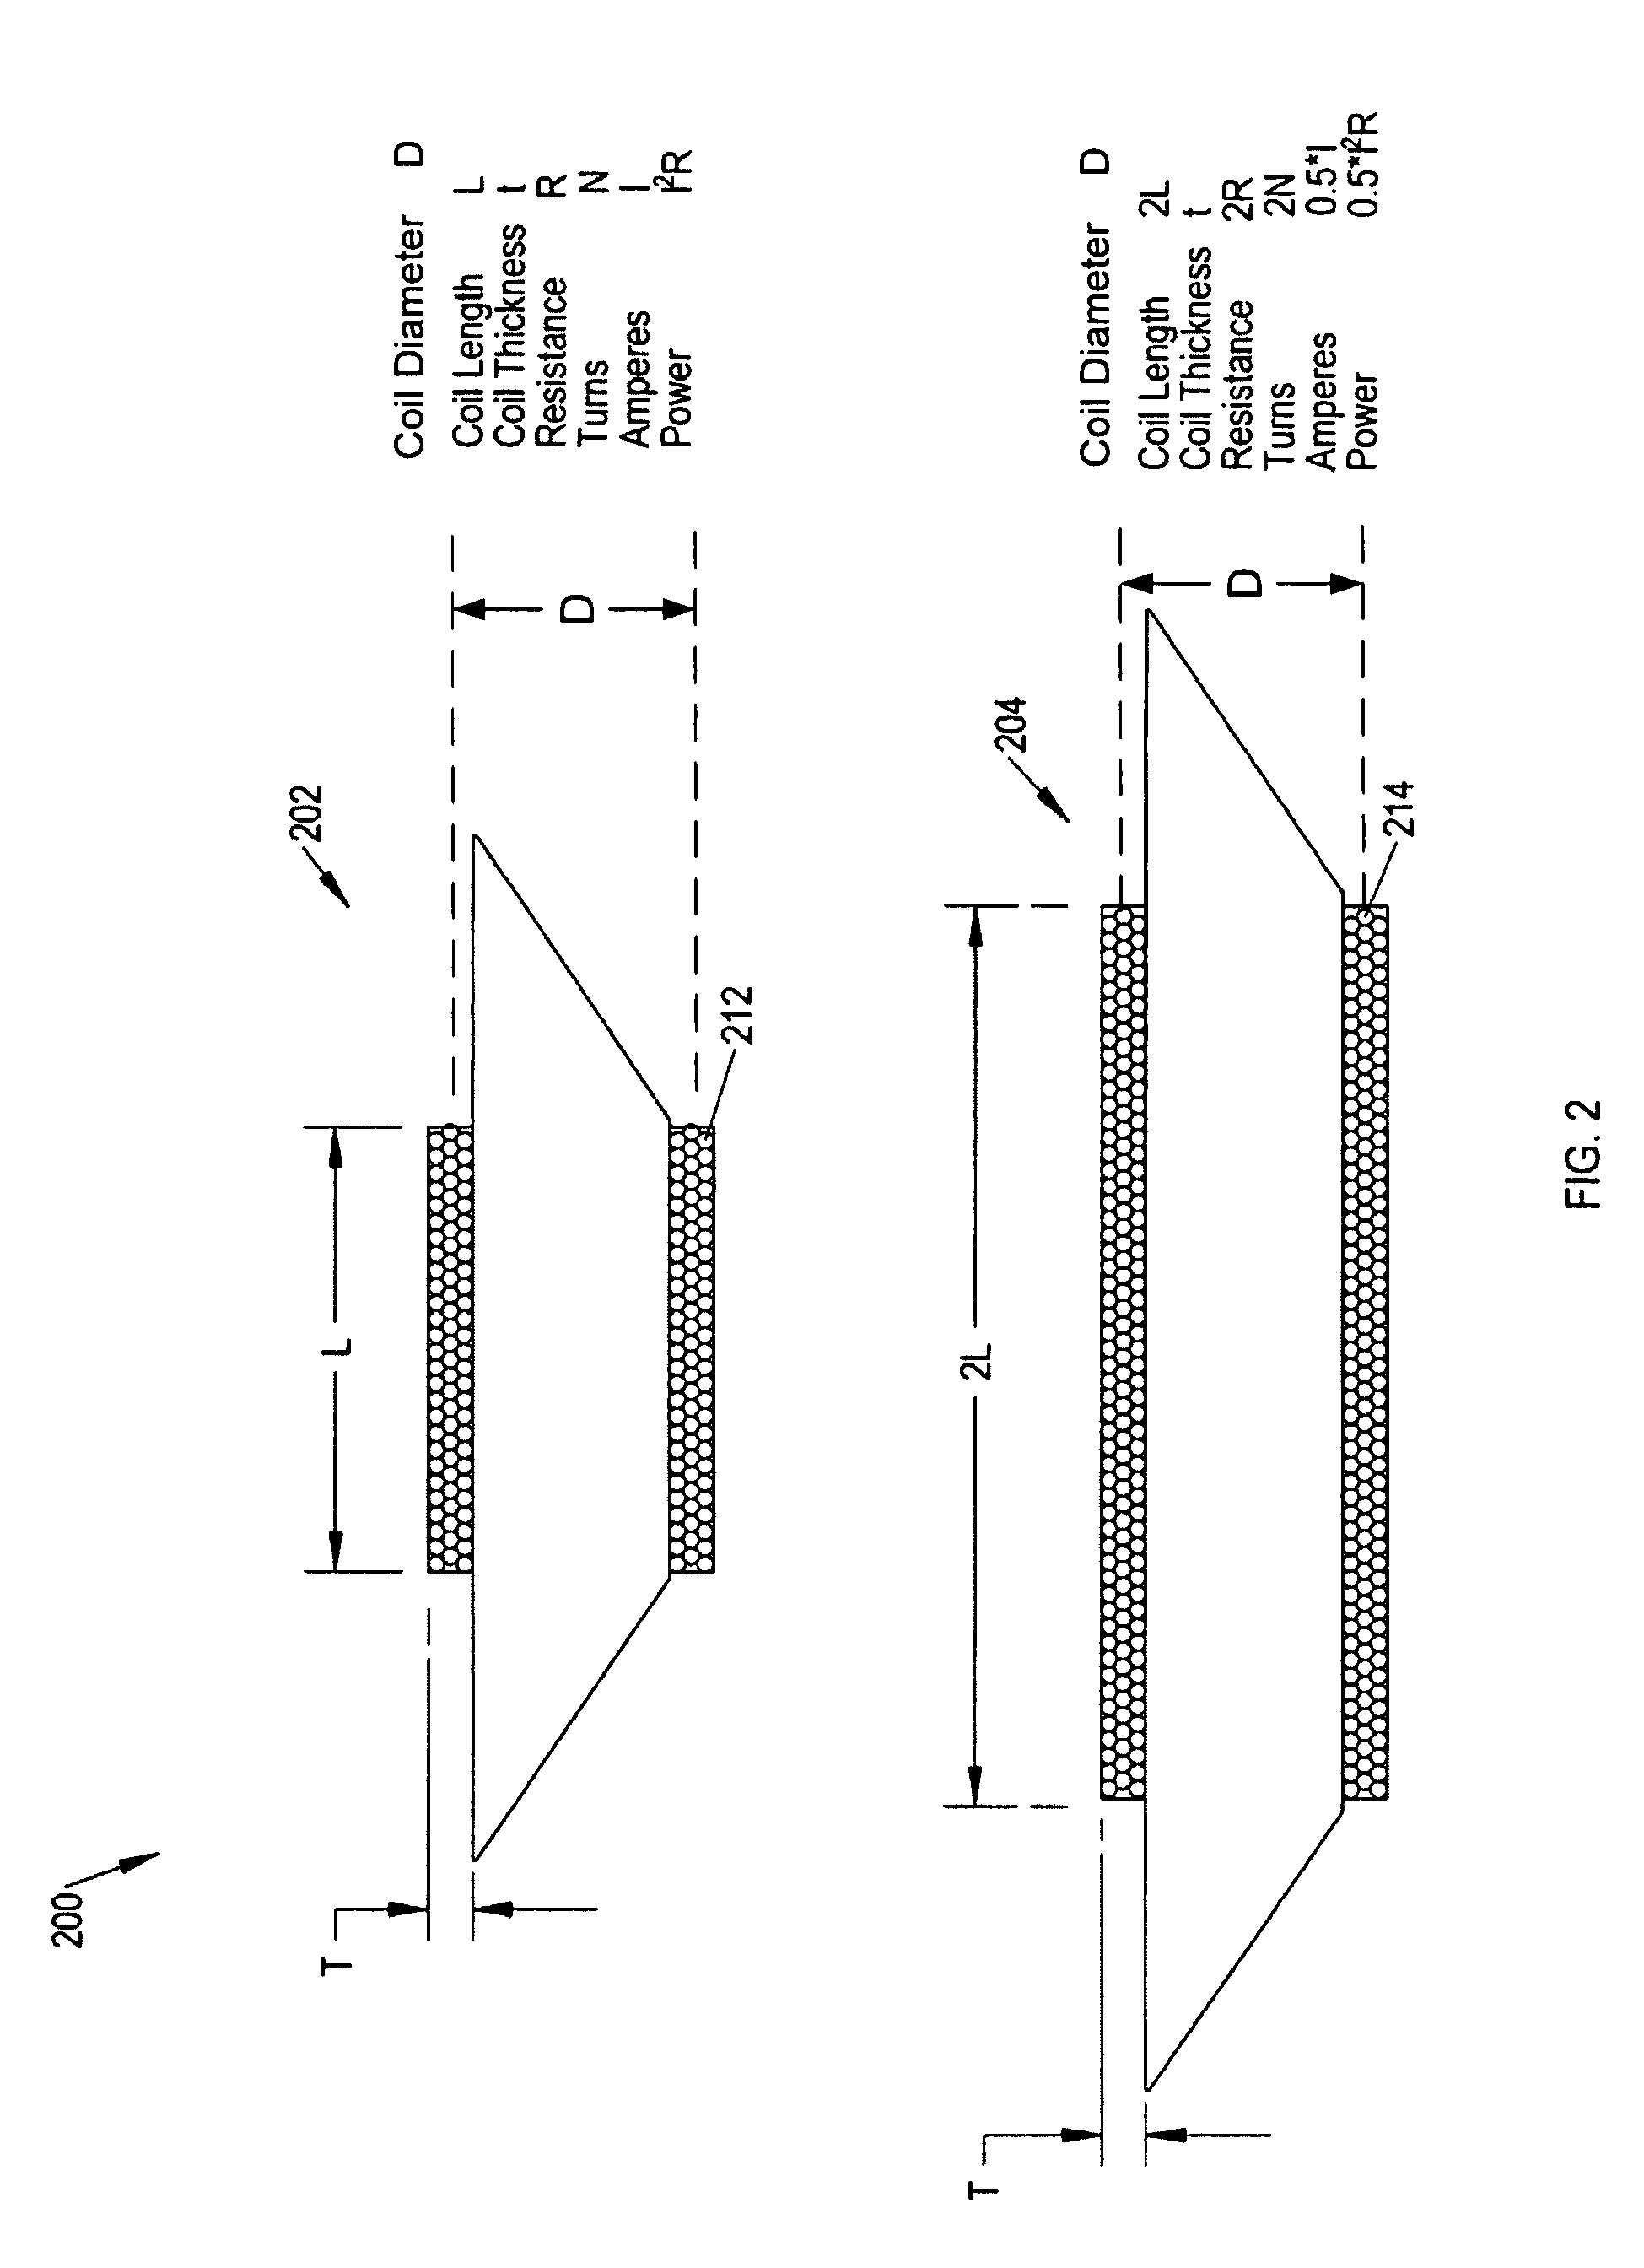 Computer-readable medium, a method and an apparatus for designing and simulating electrodynamic machines implementing conical and cylindrical magnets